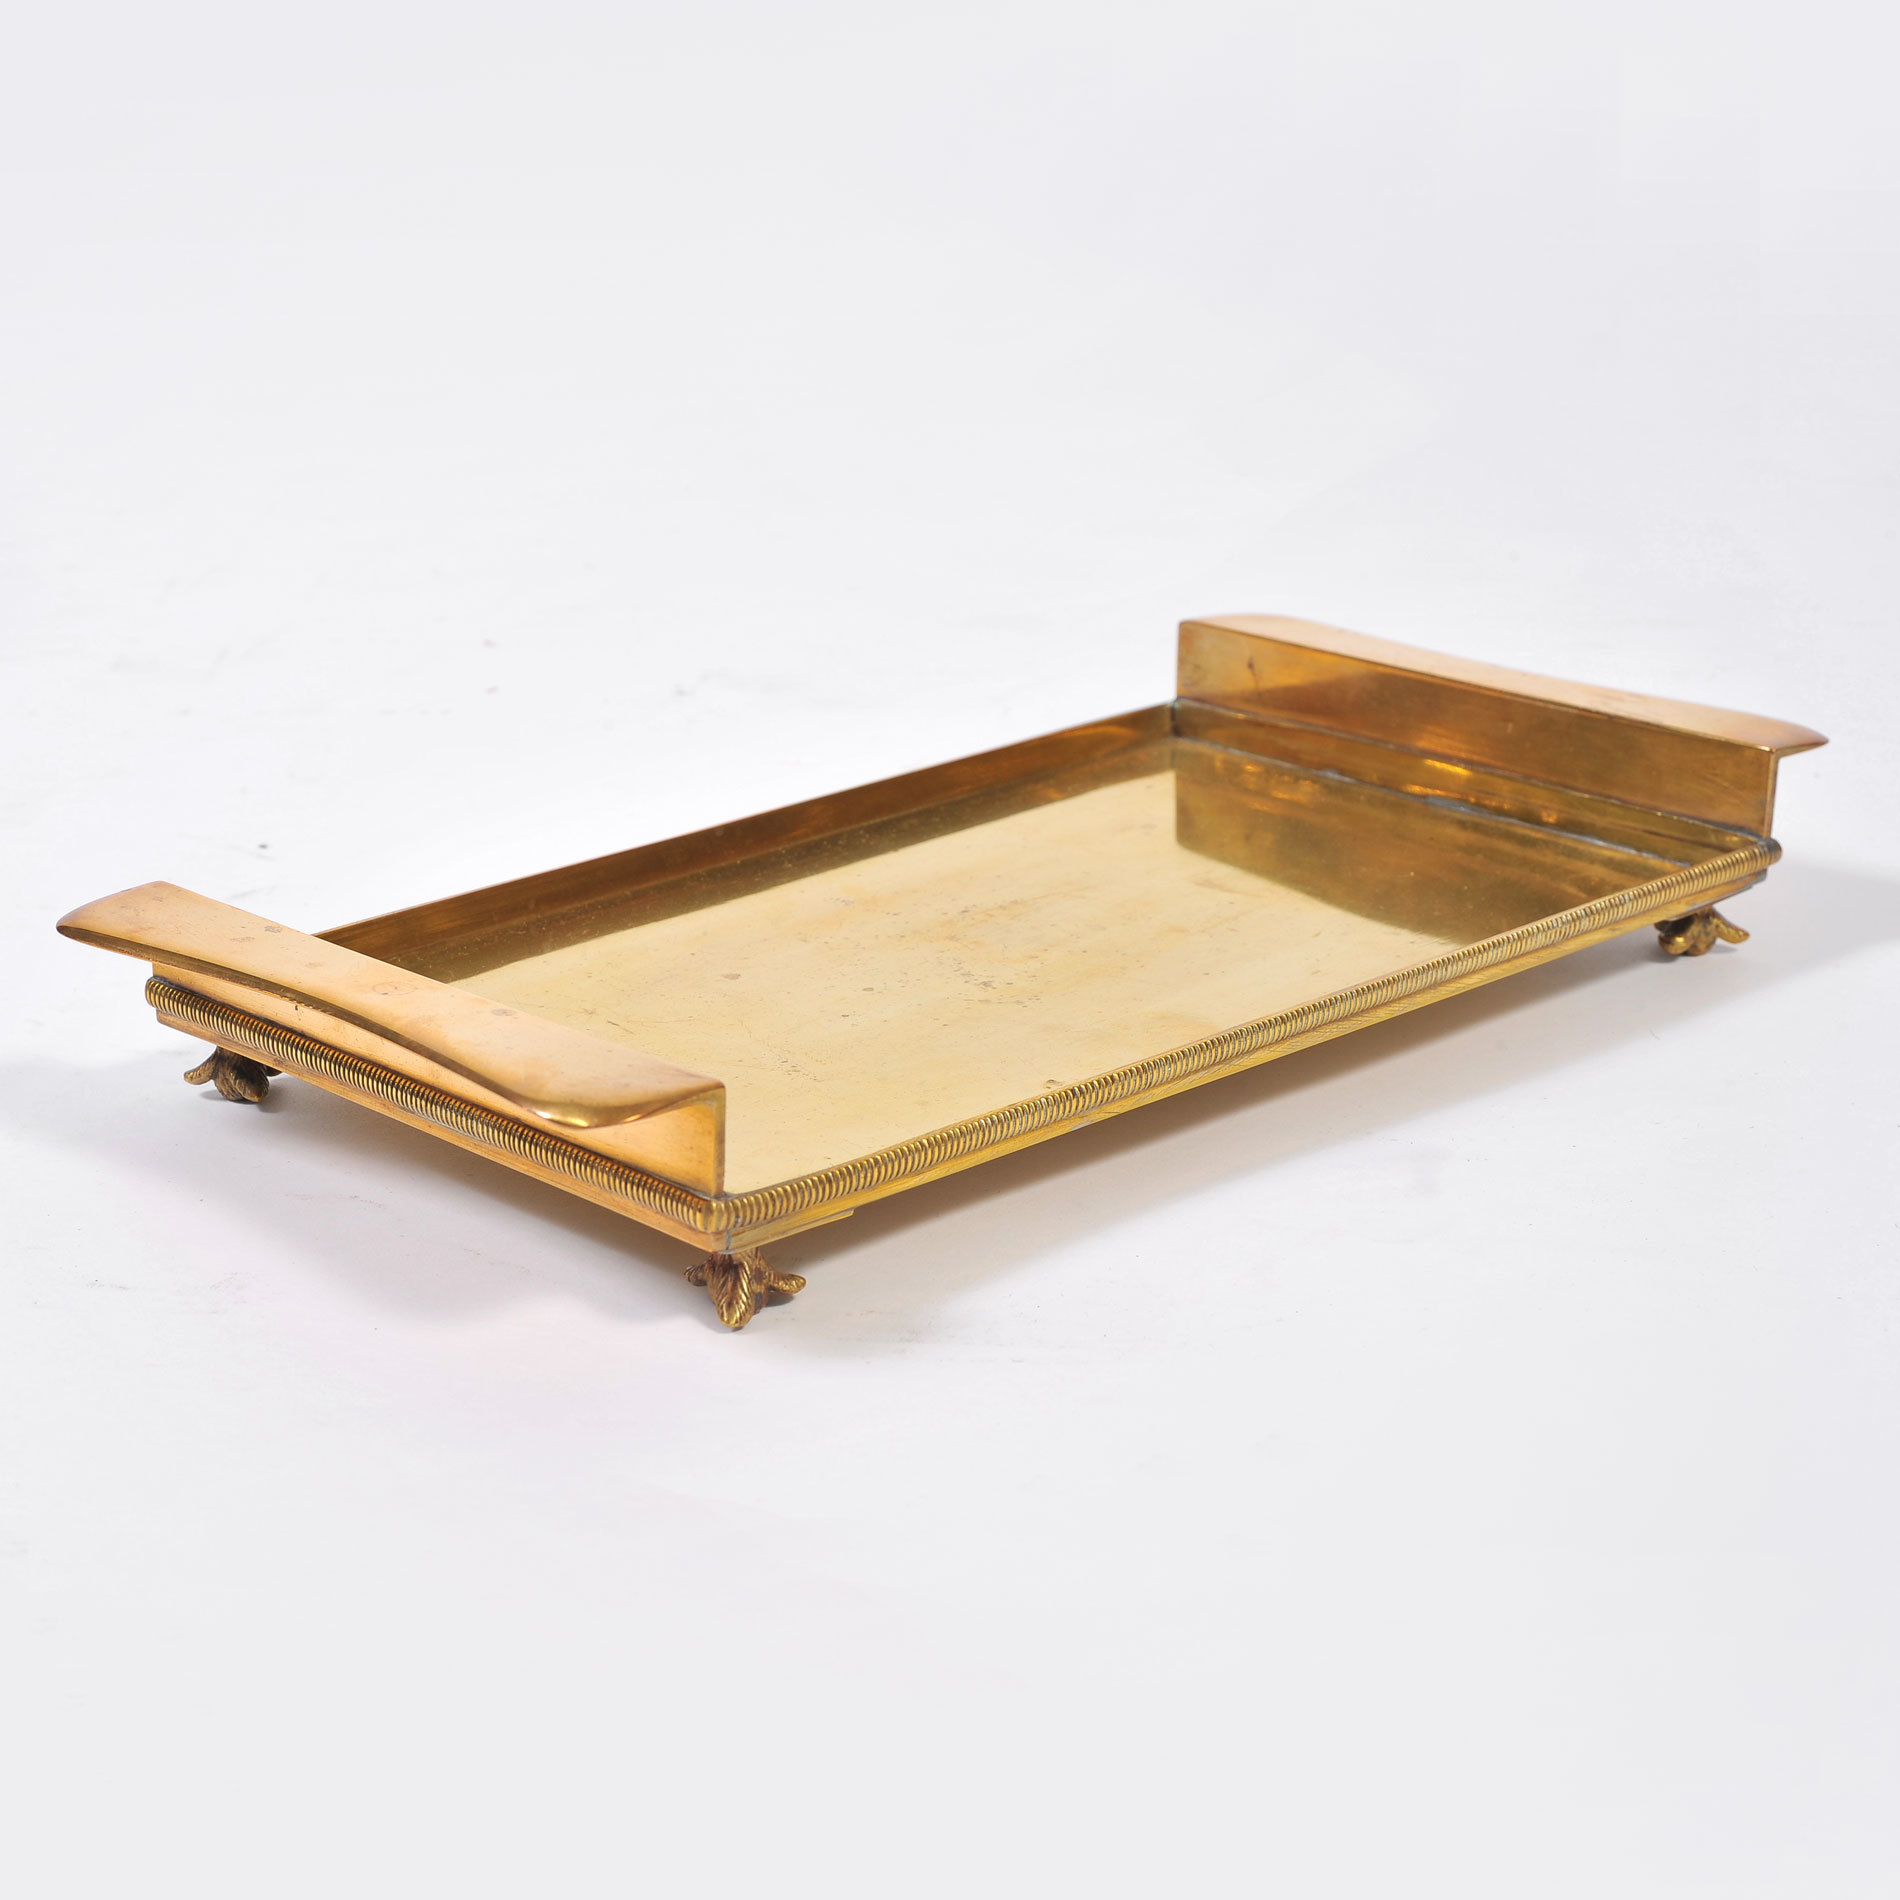 The image for Rectangular Bras Tray On Feet 01